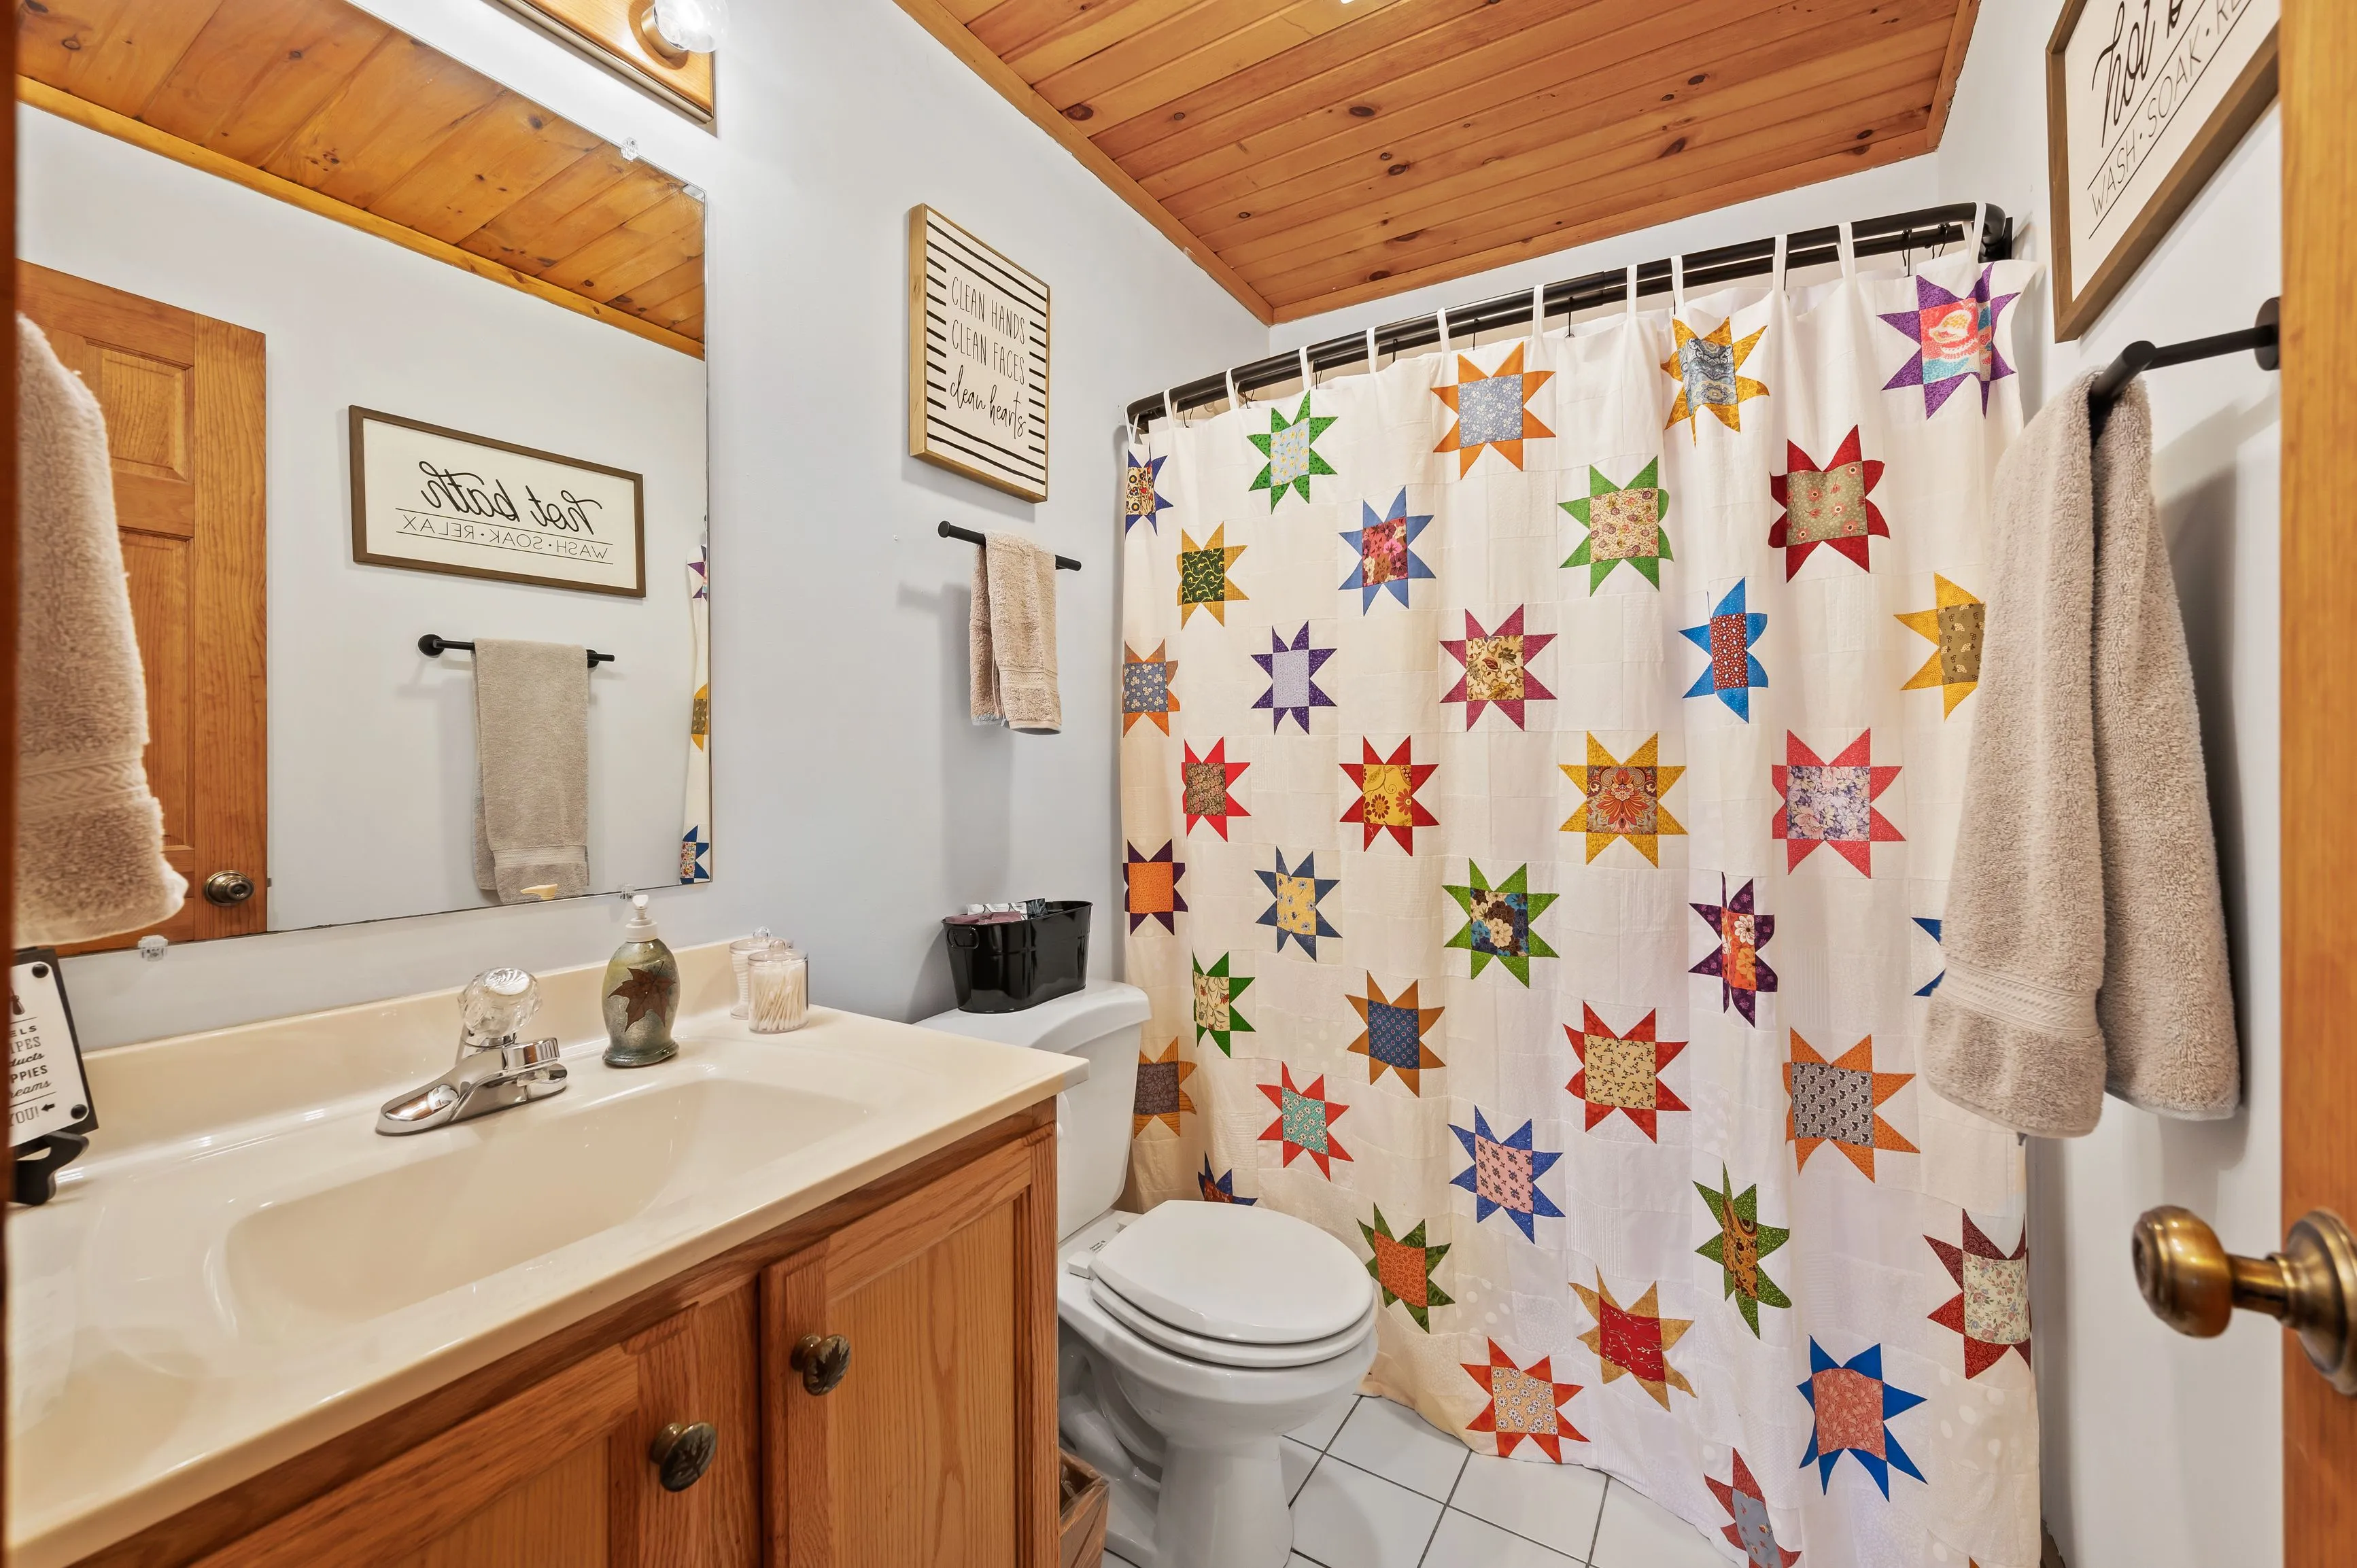 Cozy bathroom interior with wooden accents, a star-patterned shower curtain, and decorative wall art displaying sayings.